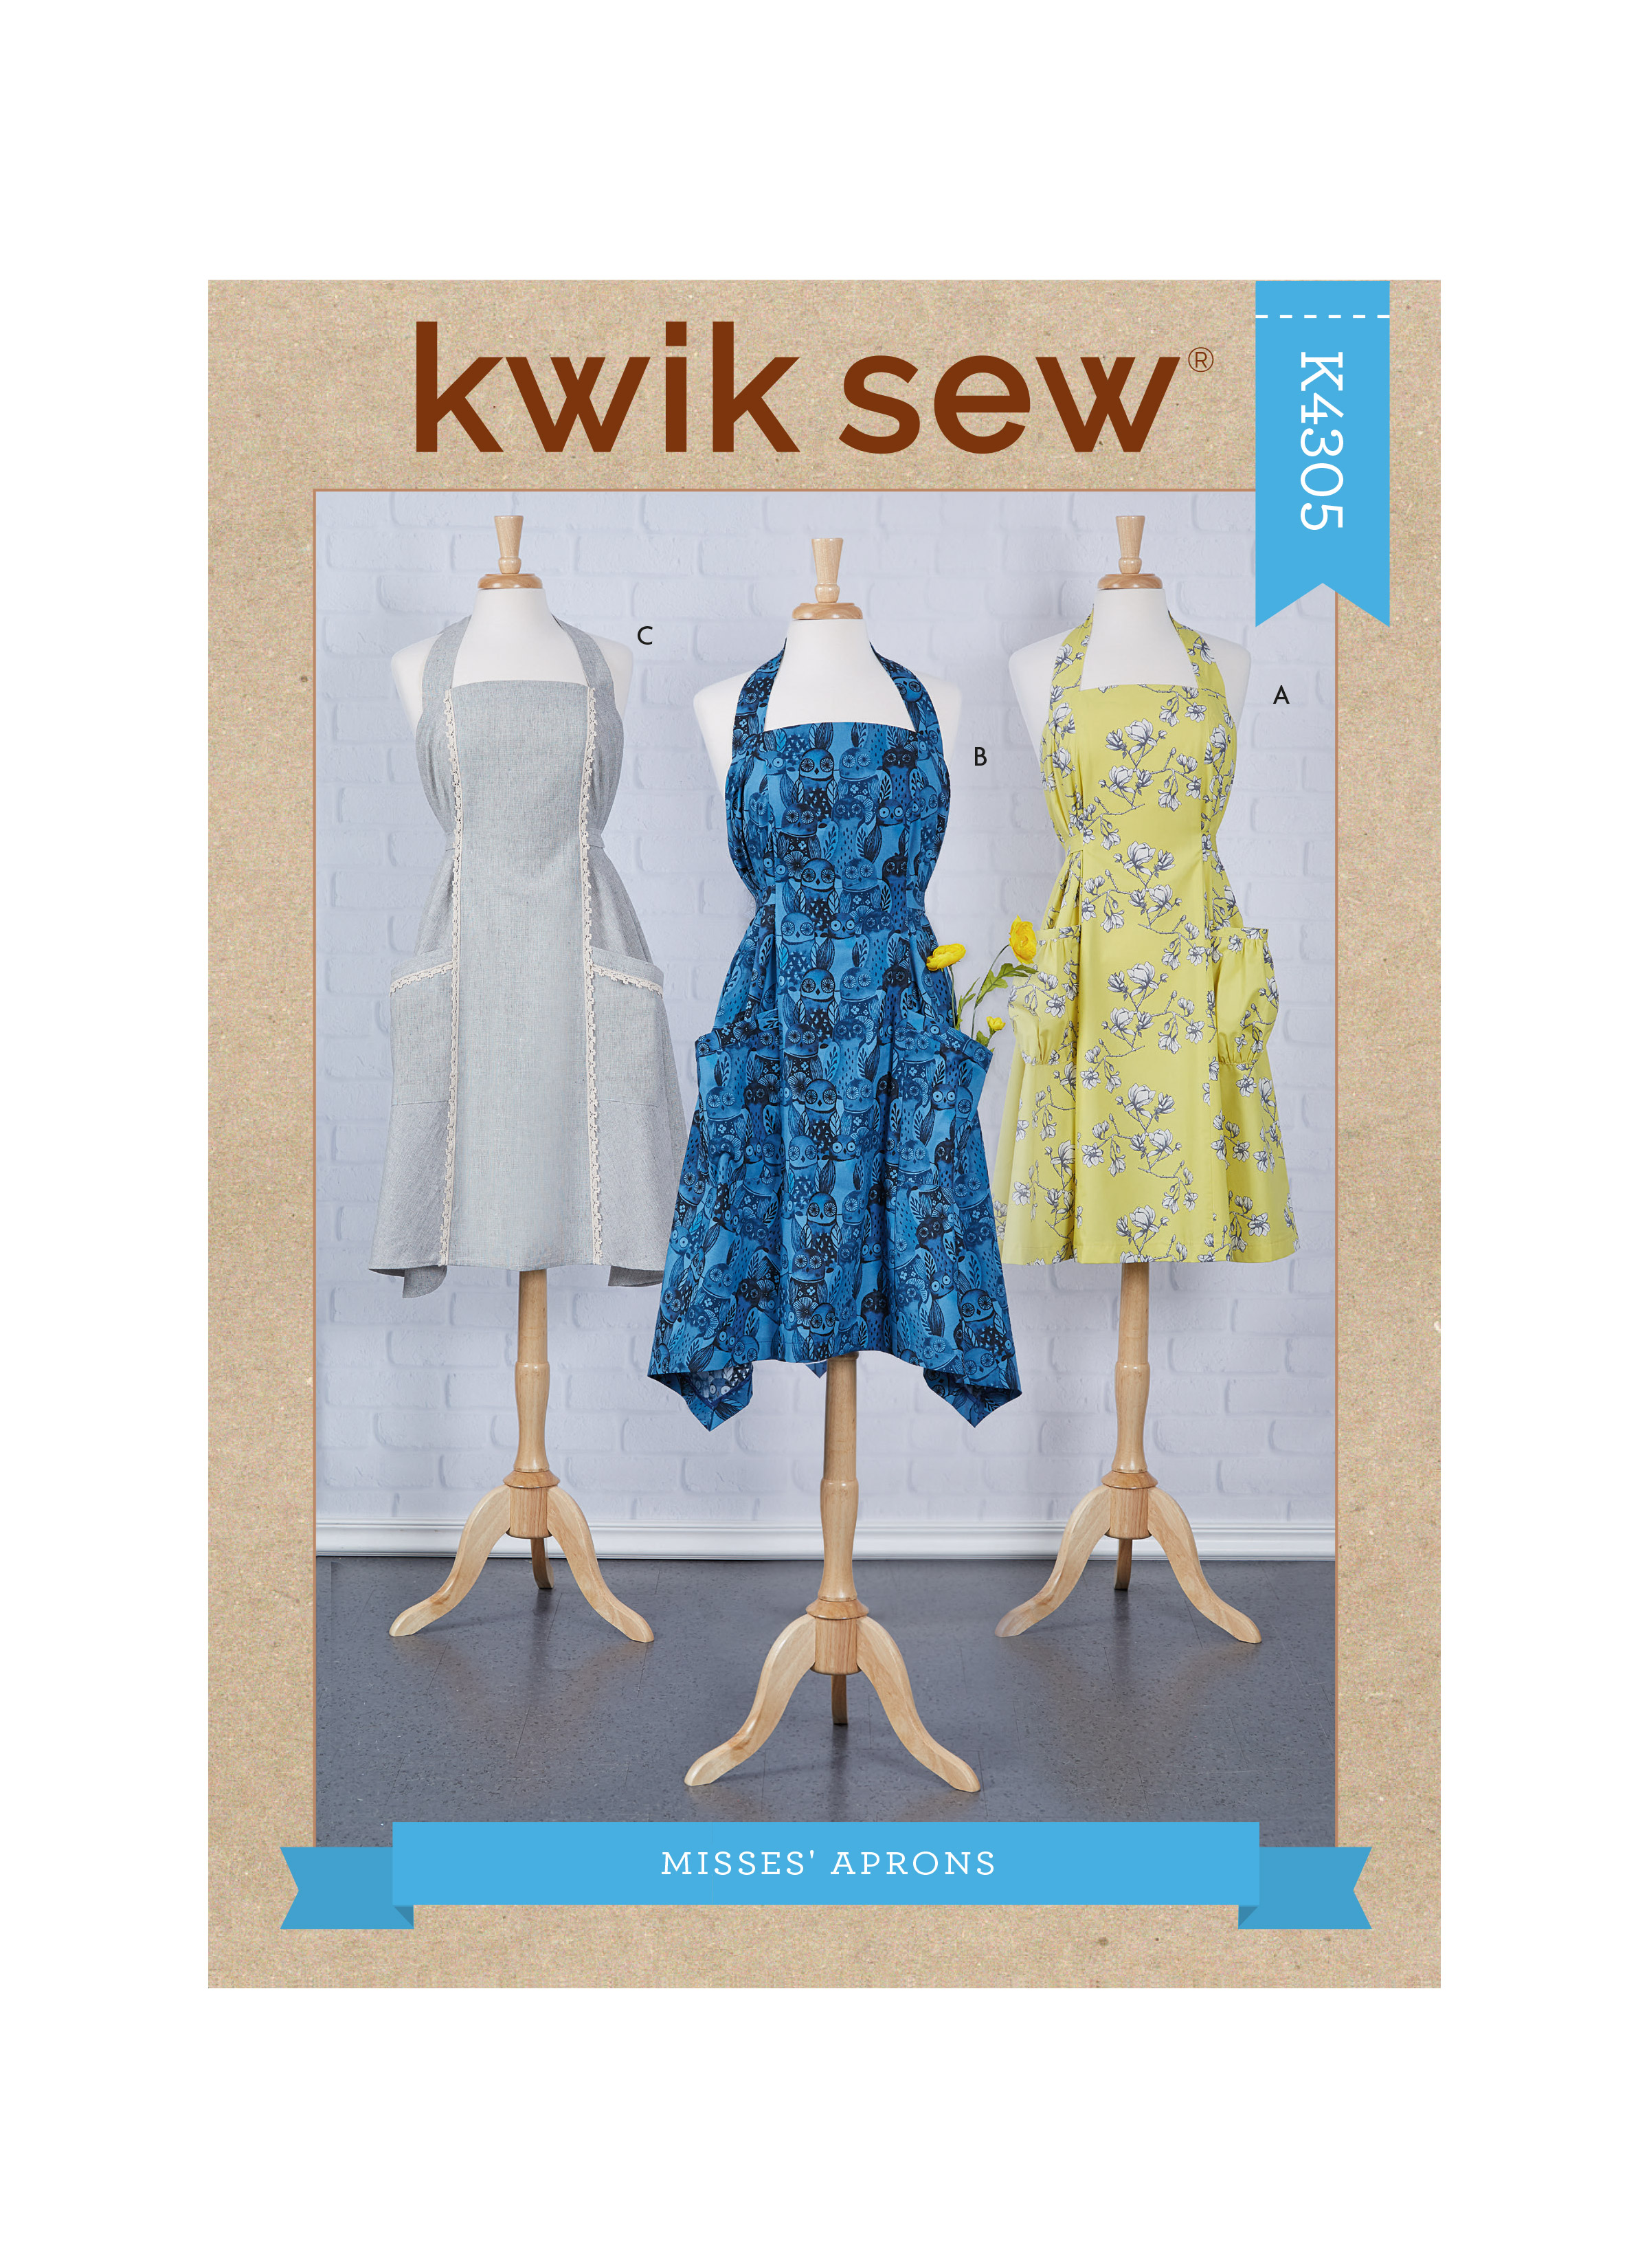 https://images.patternreview.com/sewing/patterns/kwiksew/2020/4305/4305.jpg